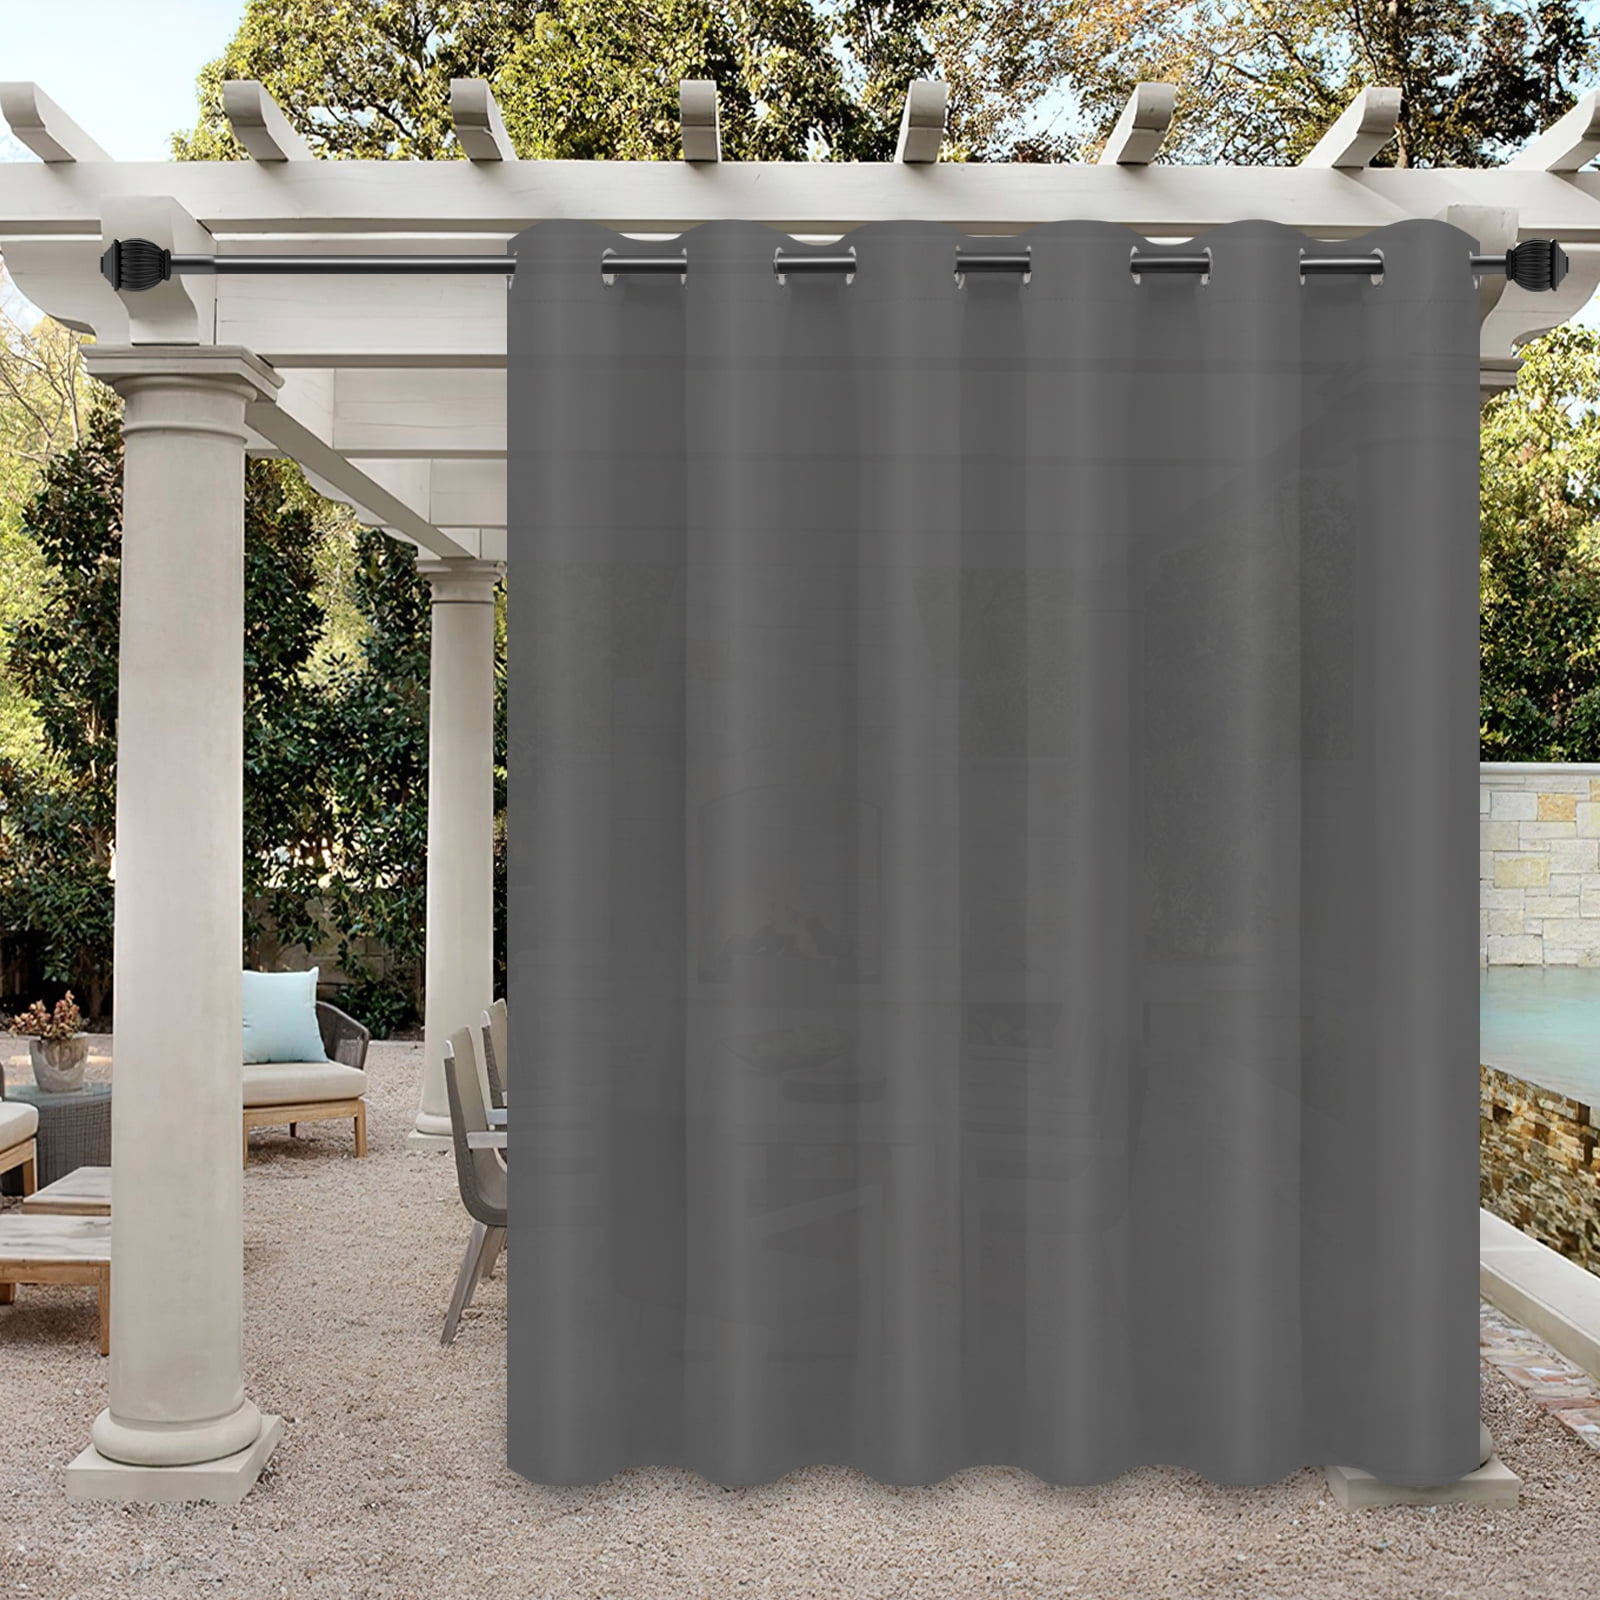 Outdoor Decor Gazebo Grommet Outdoor Curtain Panel White 50 Wide by 108 Long